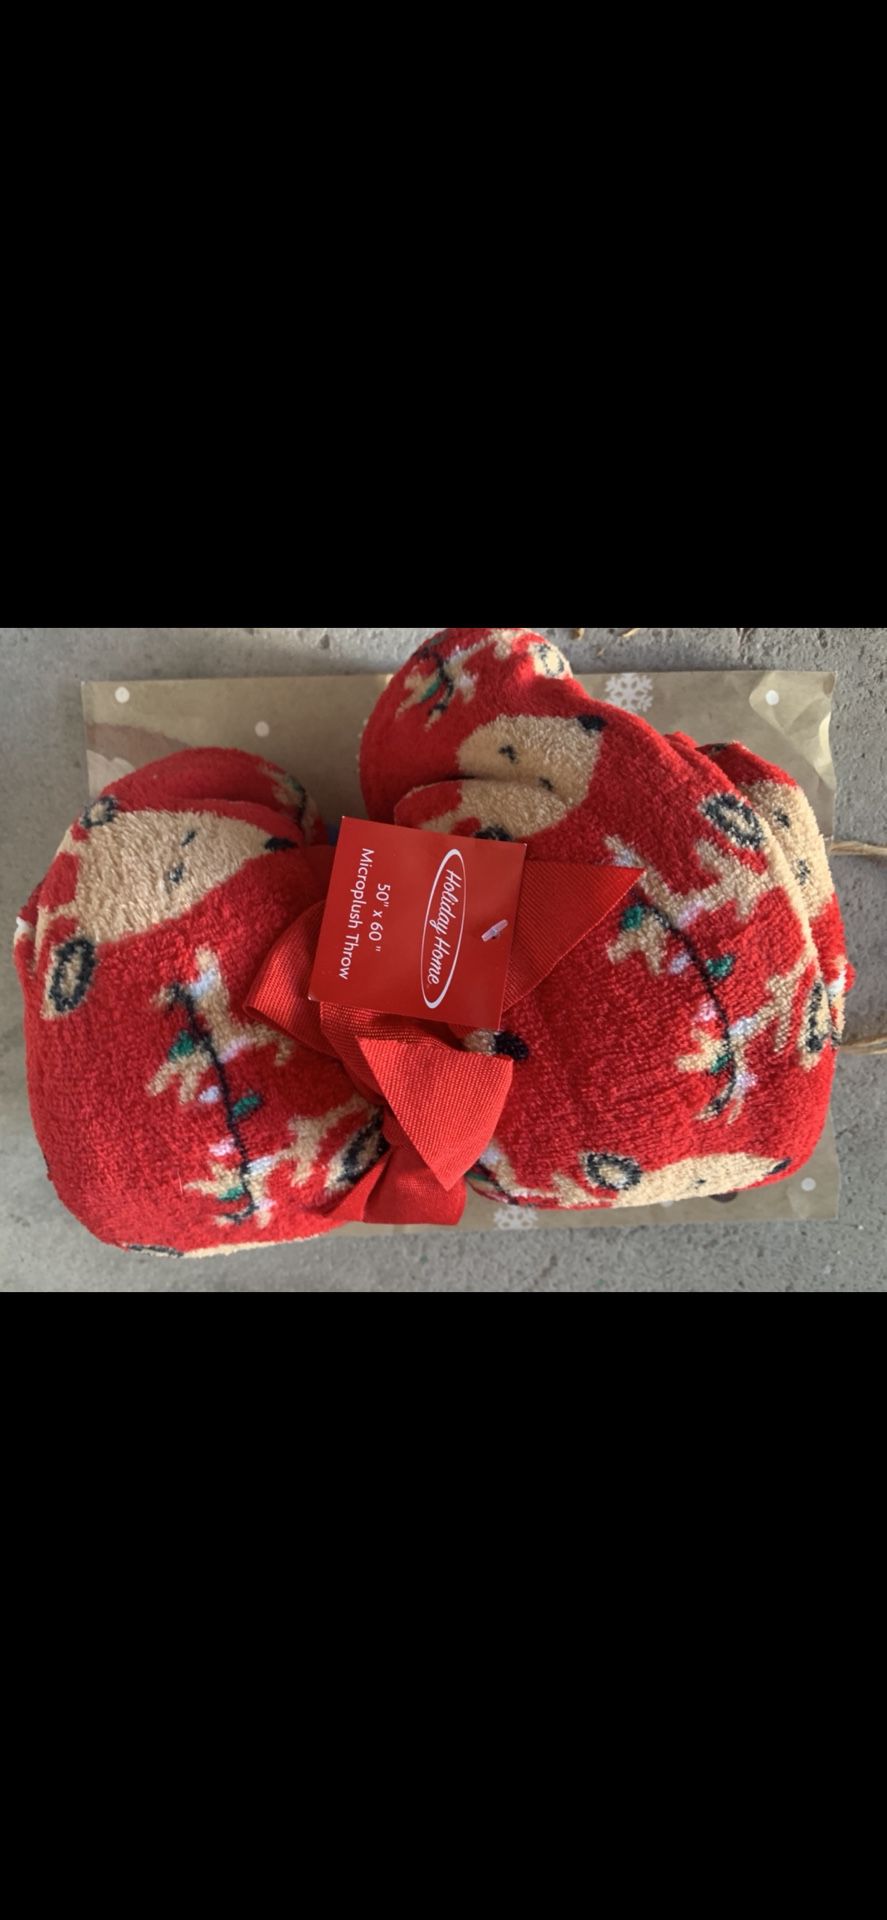 Reindeer holiday throw blanket, red and brand new, great Christmas gift